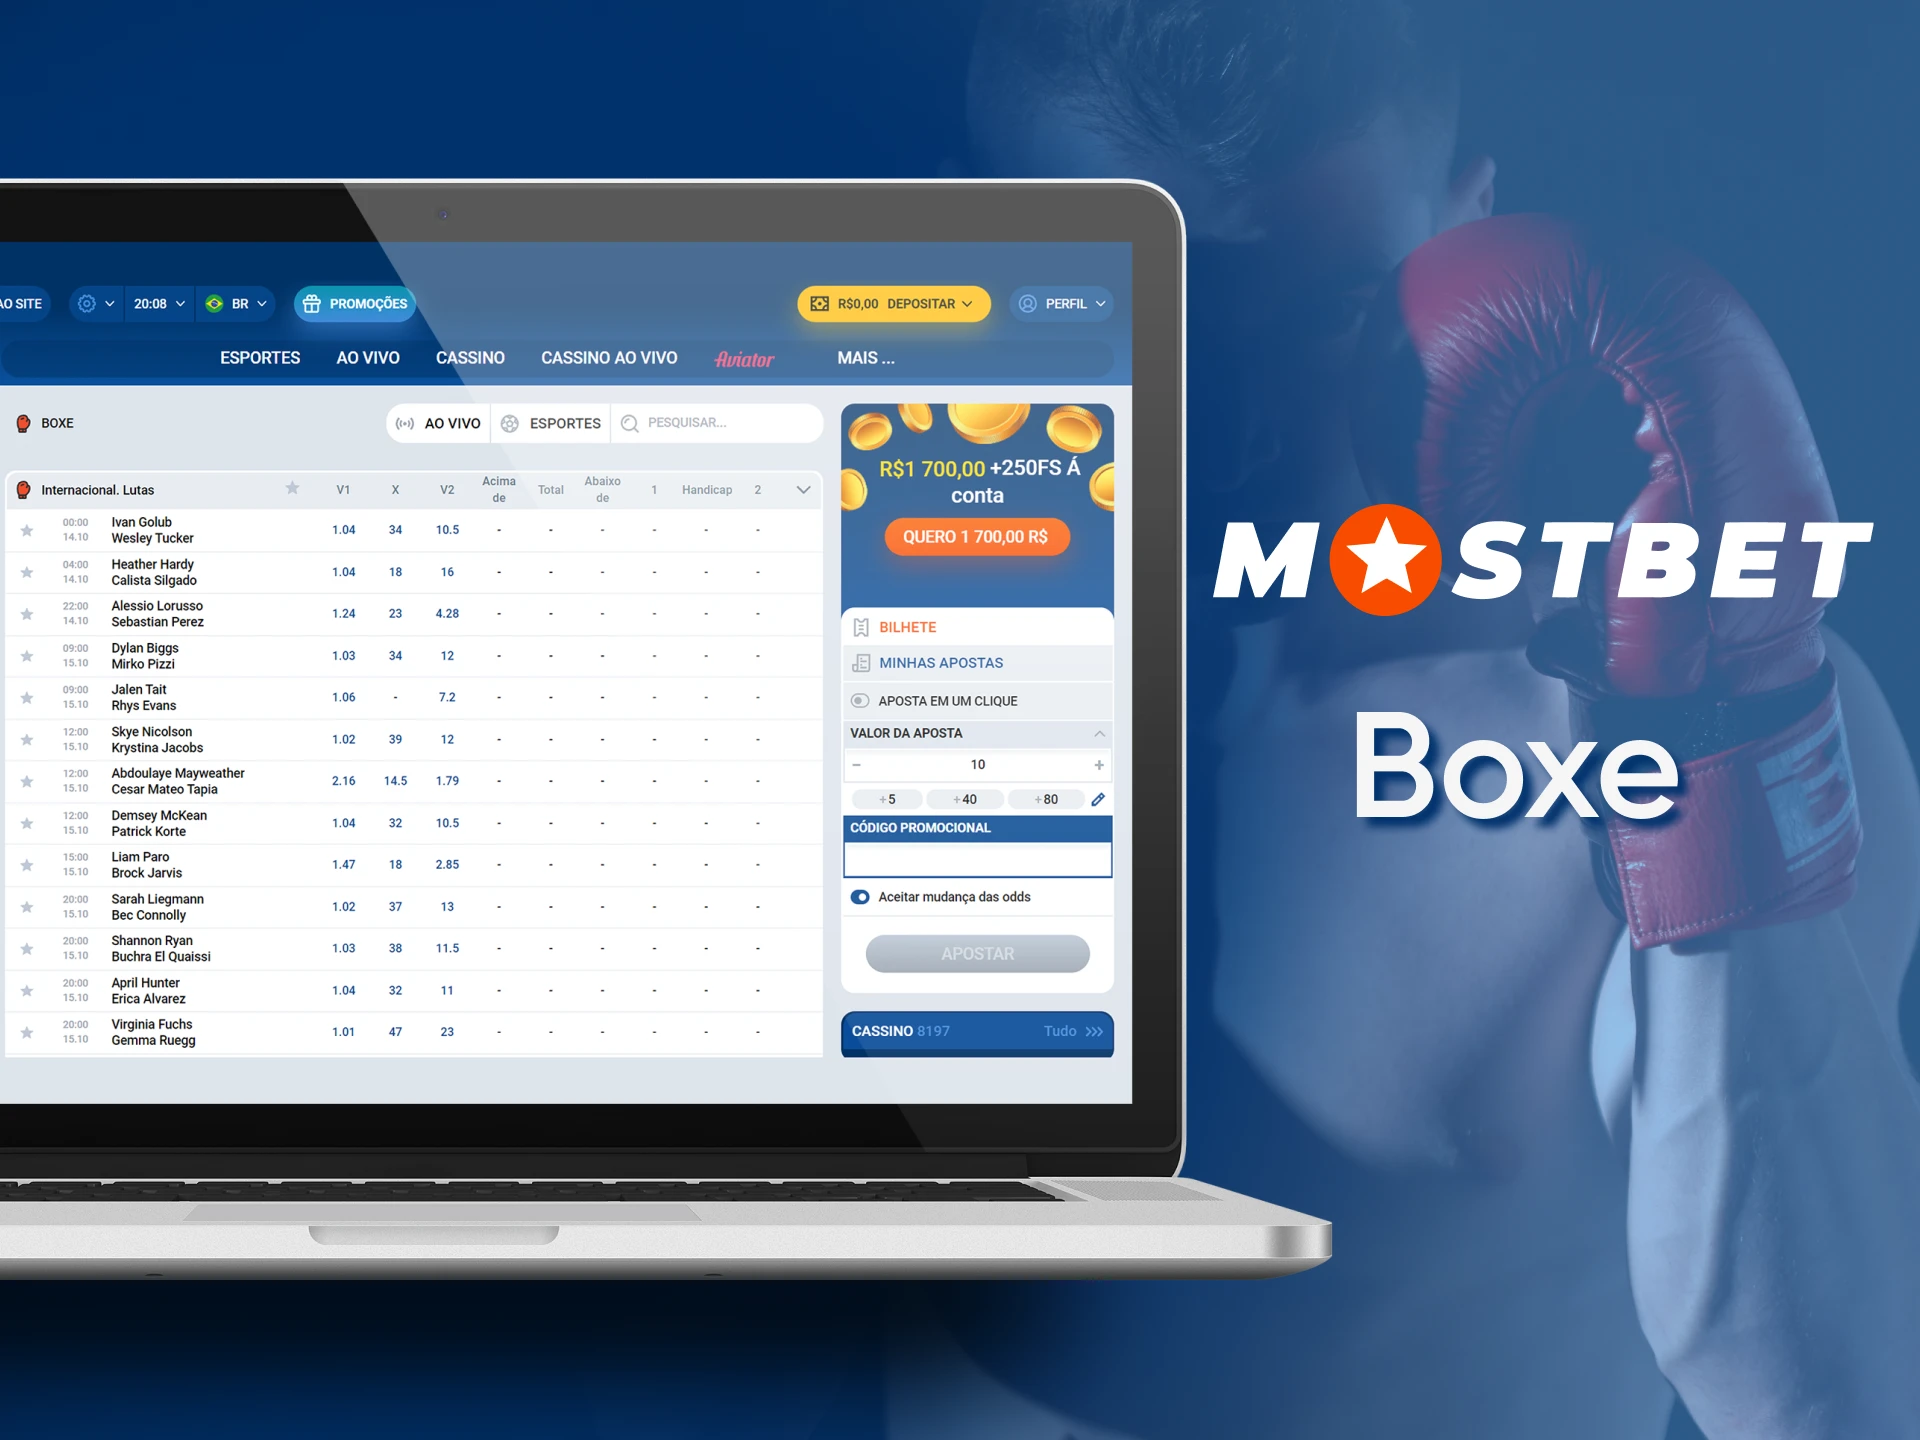 Bet on boxing with Mostbet.